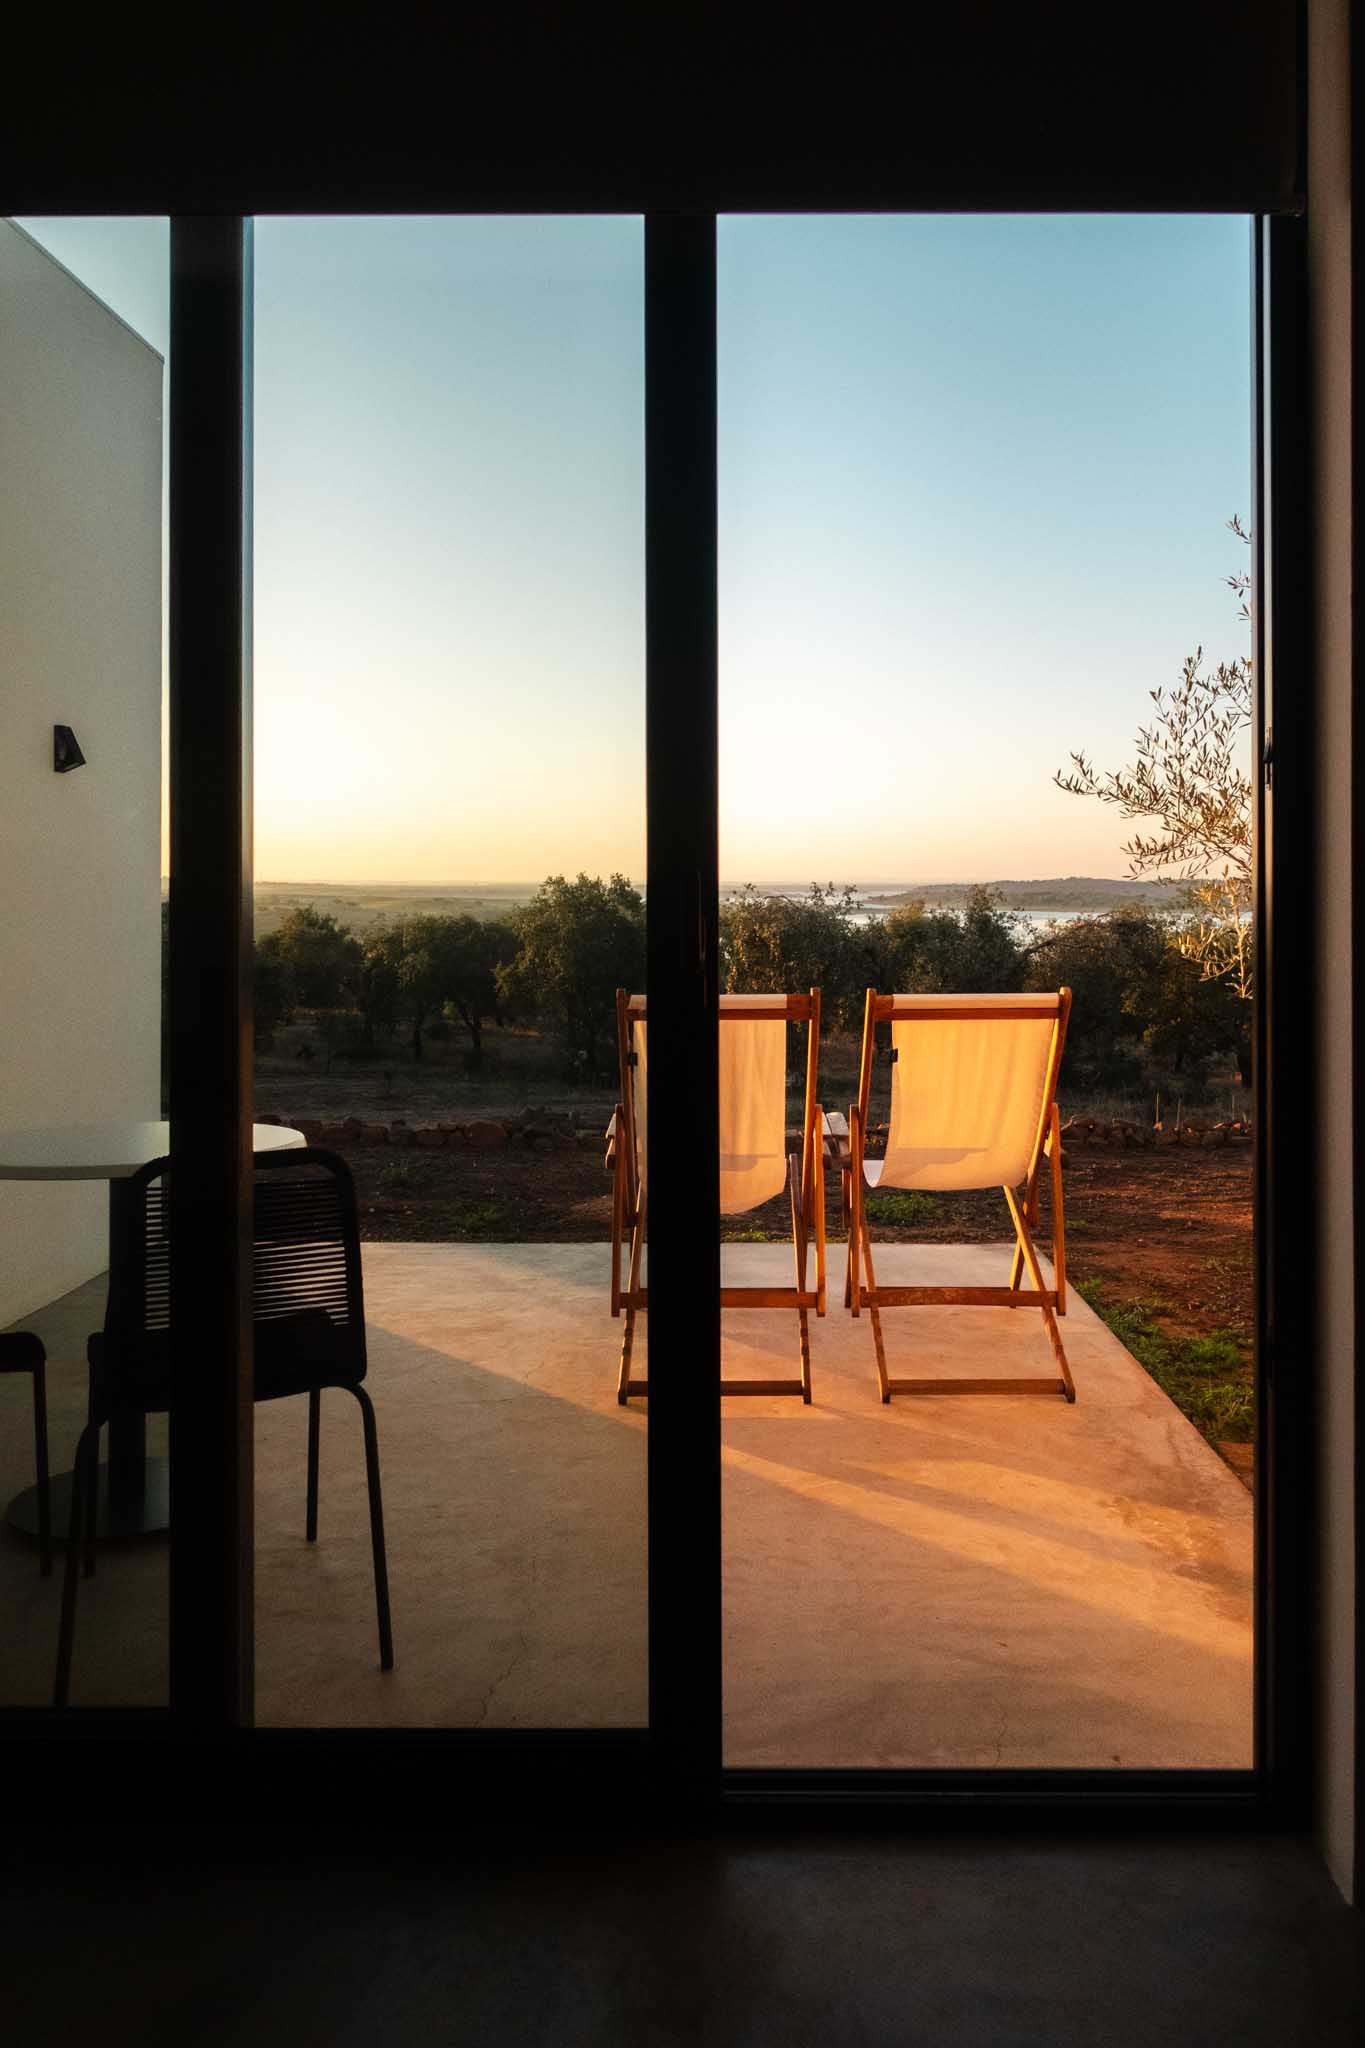 Enjoy Private Terrace at Montimerso - Montimerso SkyScape Country House - Eco Friendly Hotel in Alentejo Portugal - The Wildest Road Blog.jpg